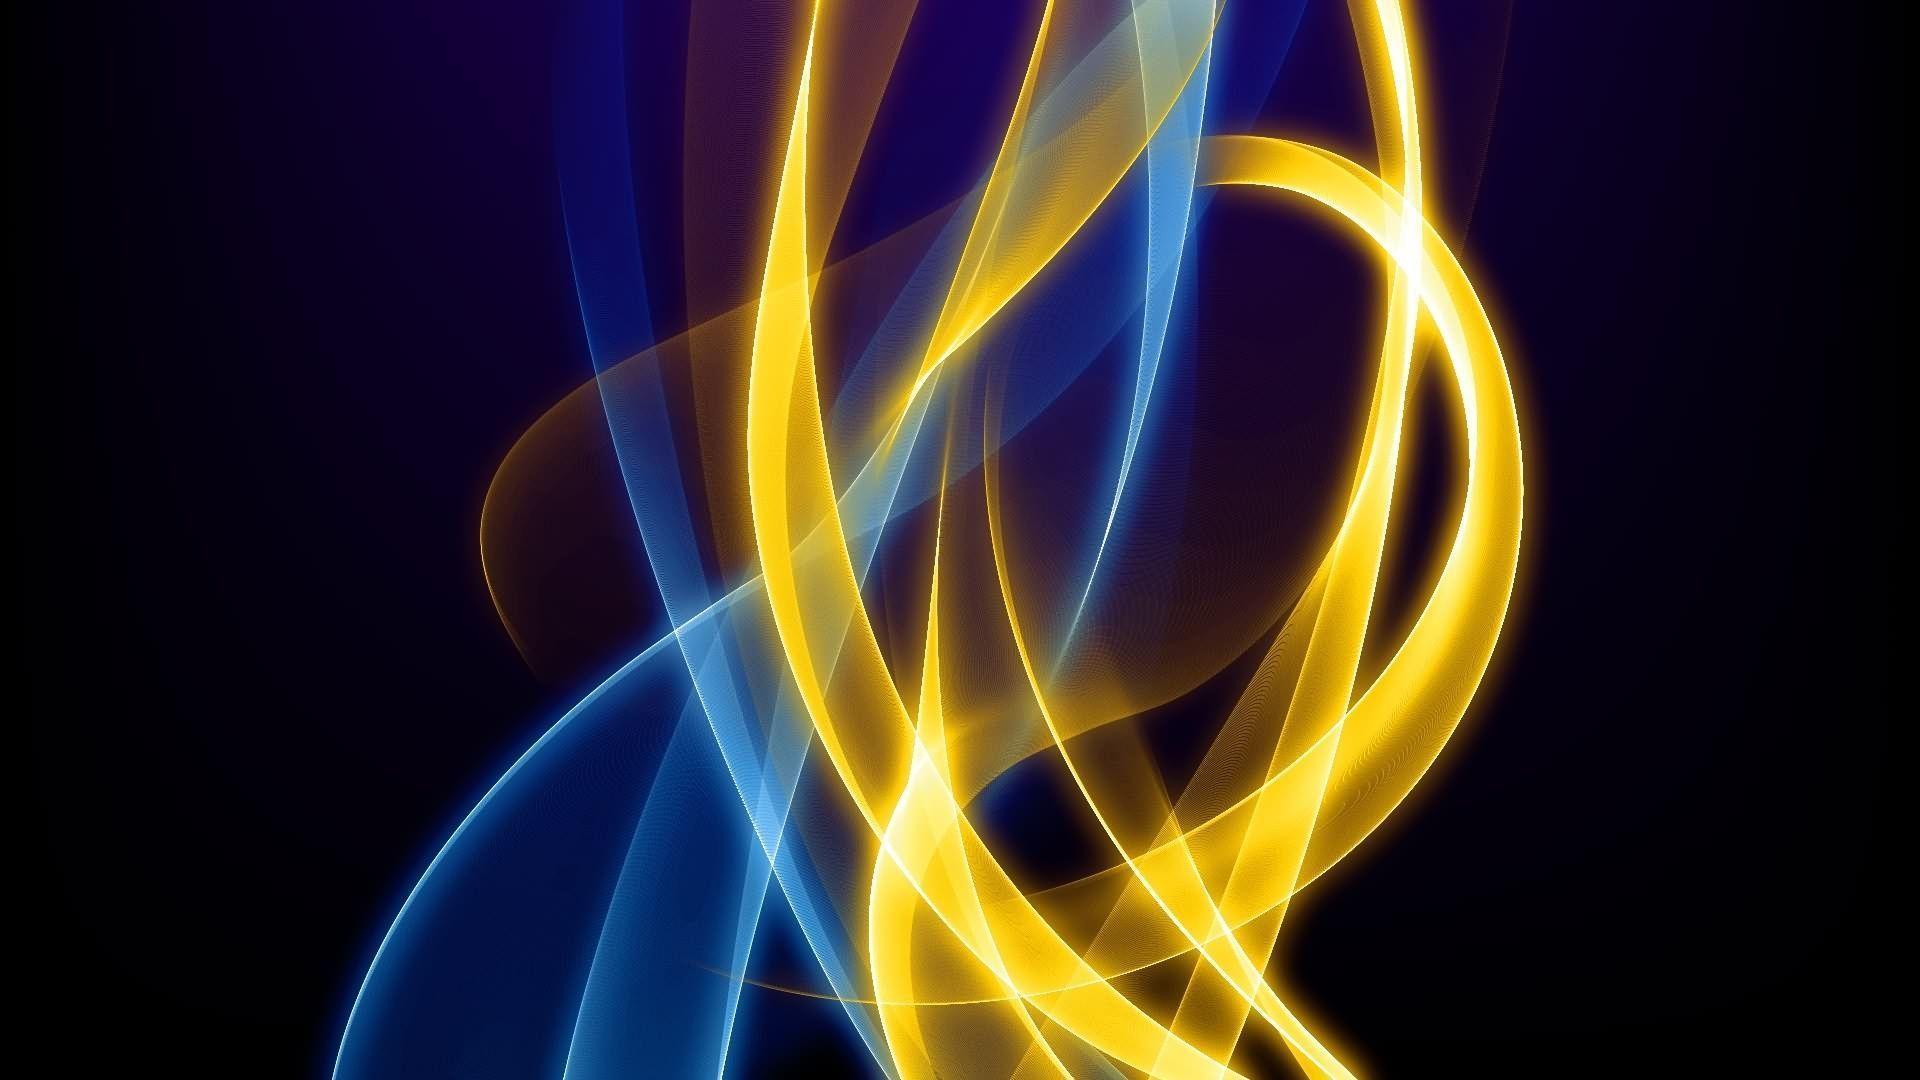 Blue And Gold Backgrounds - Wallpaper Cave